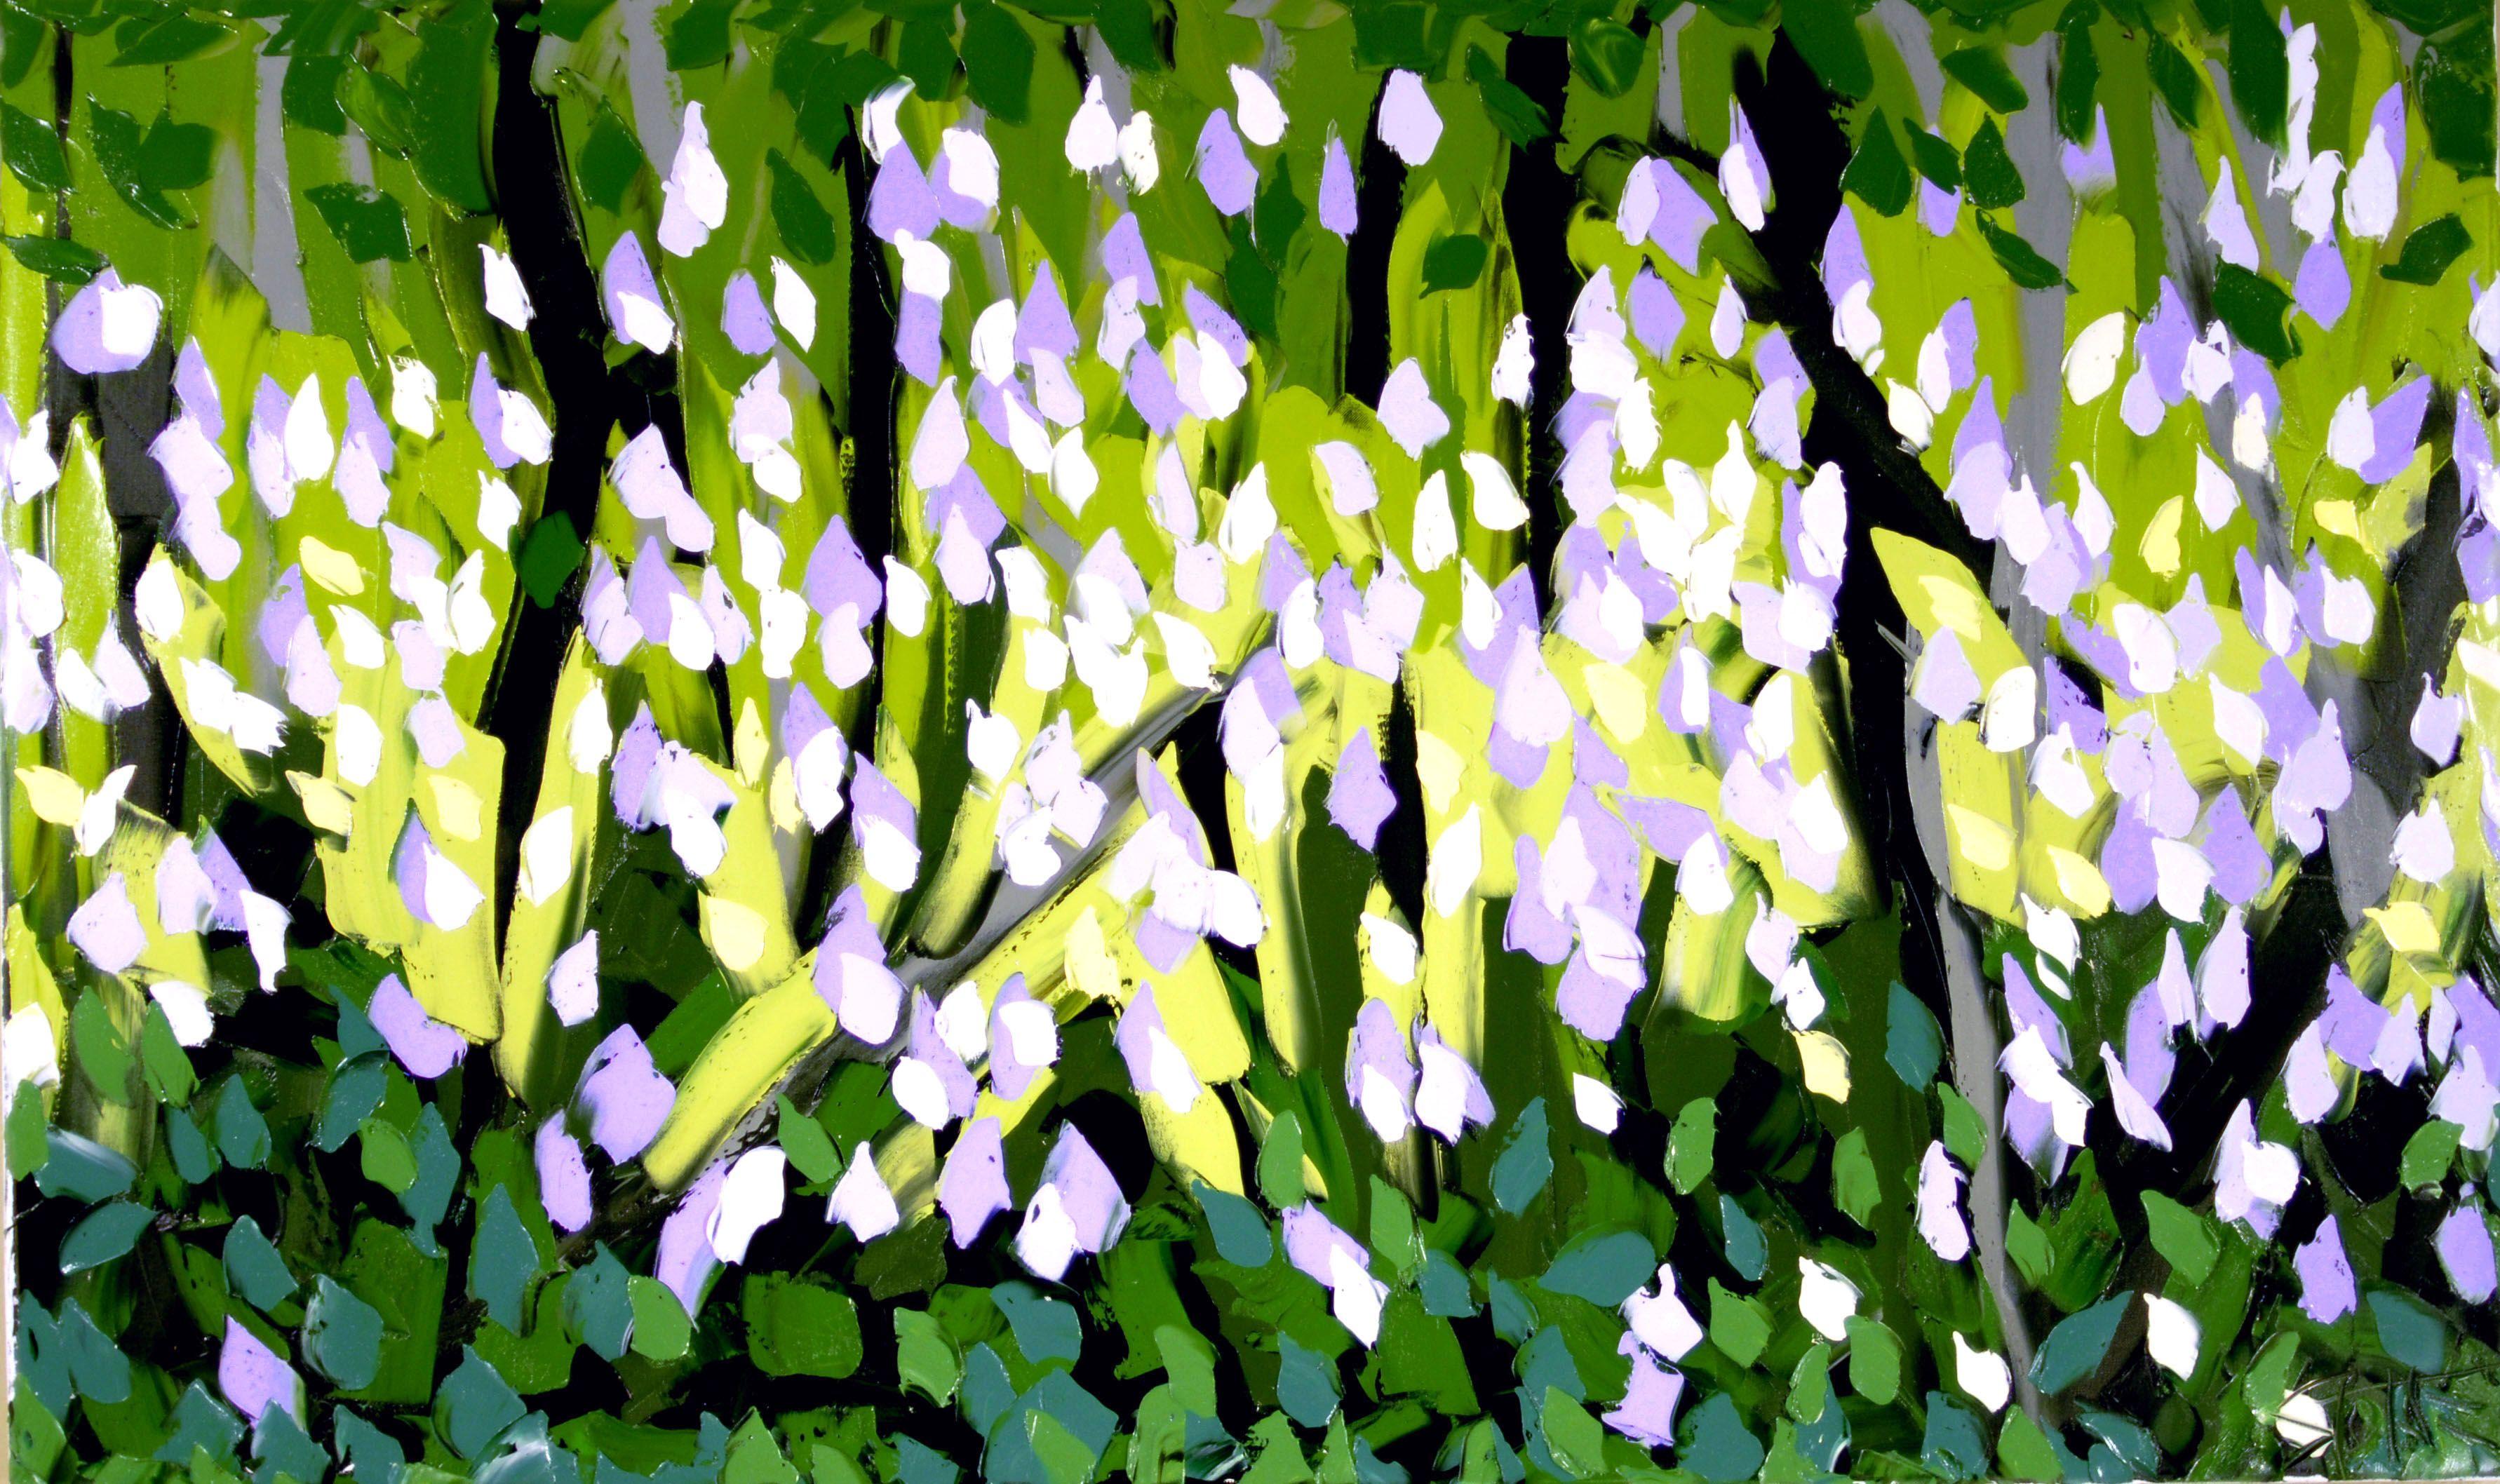 spring forest painting